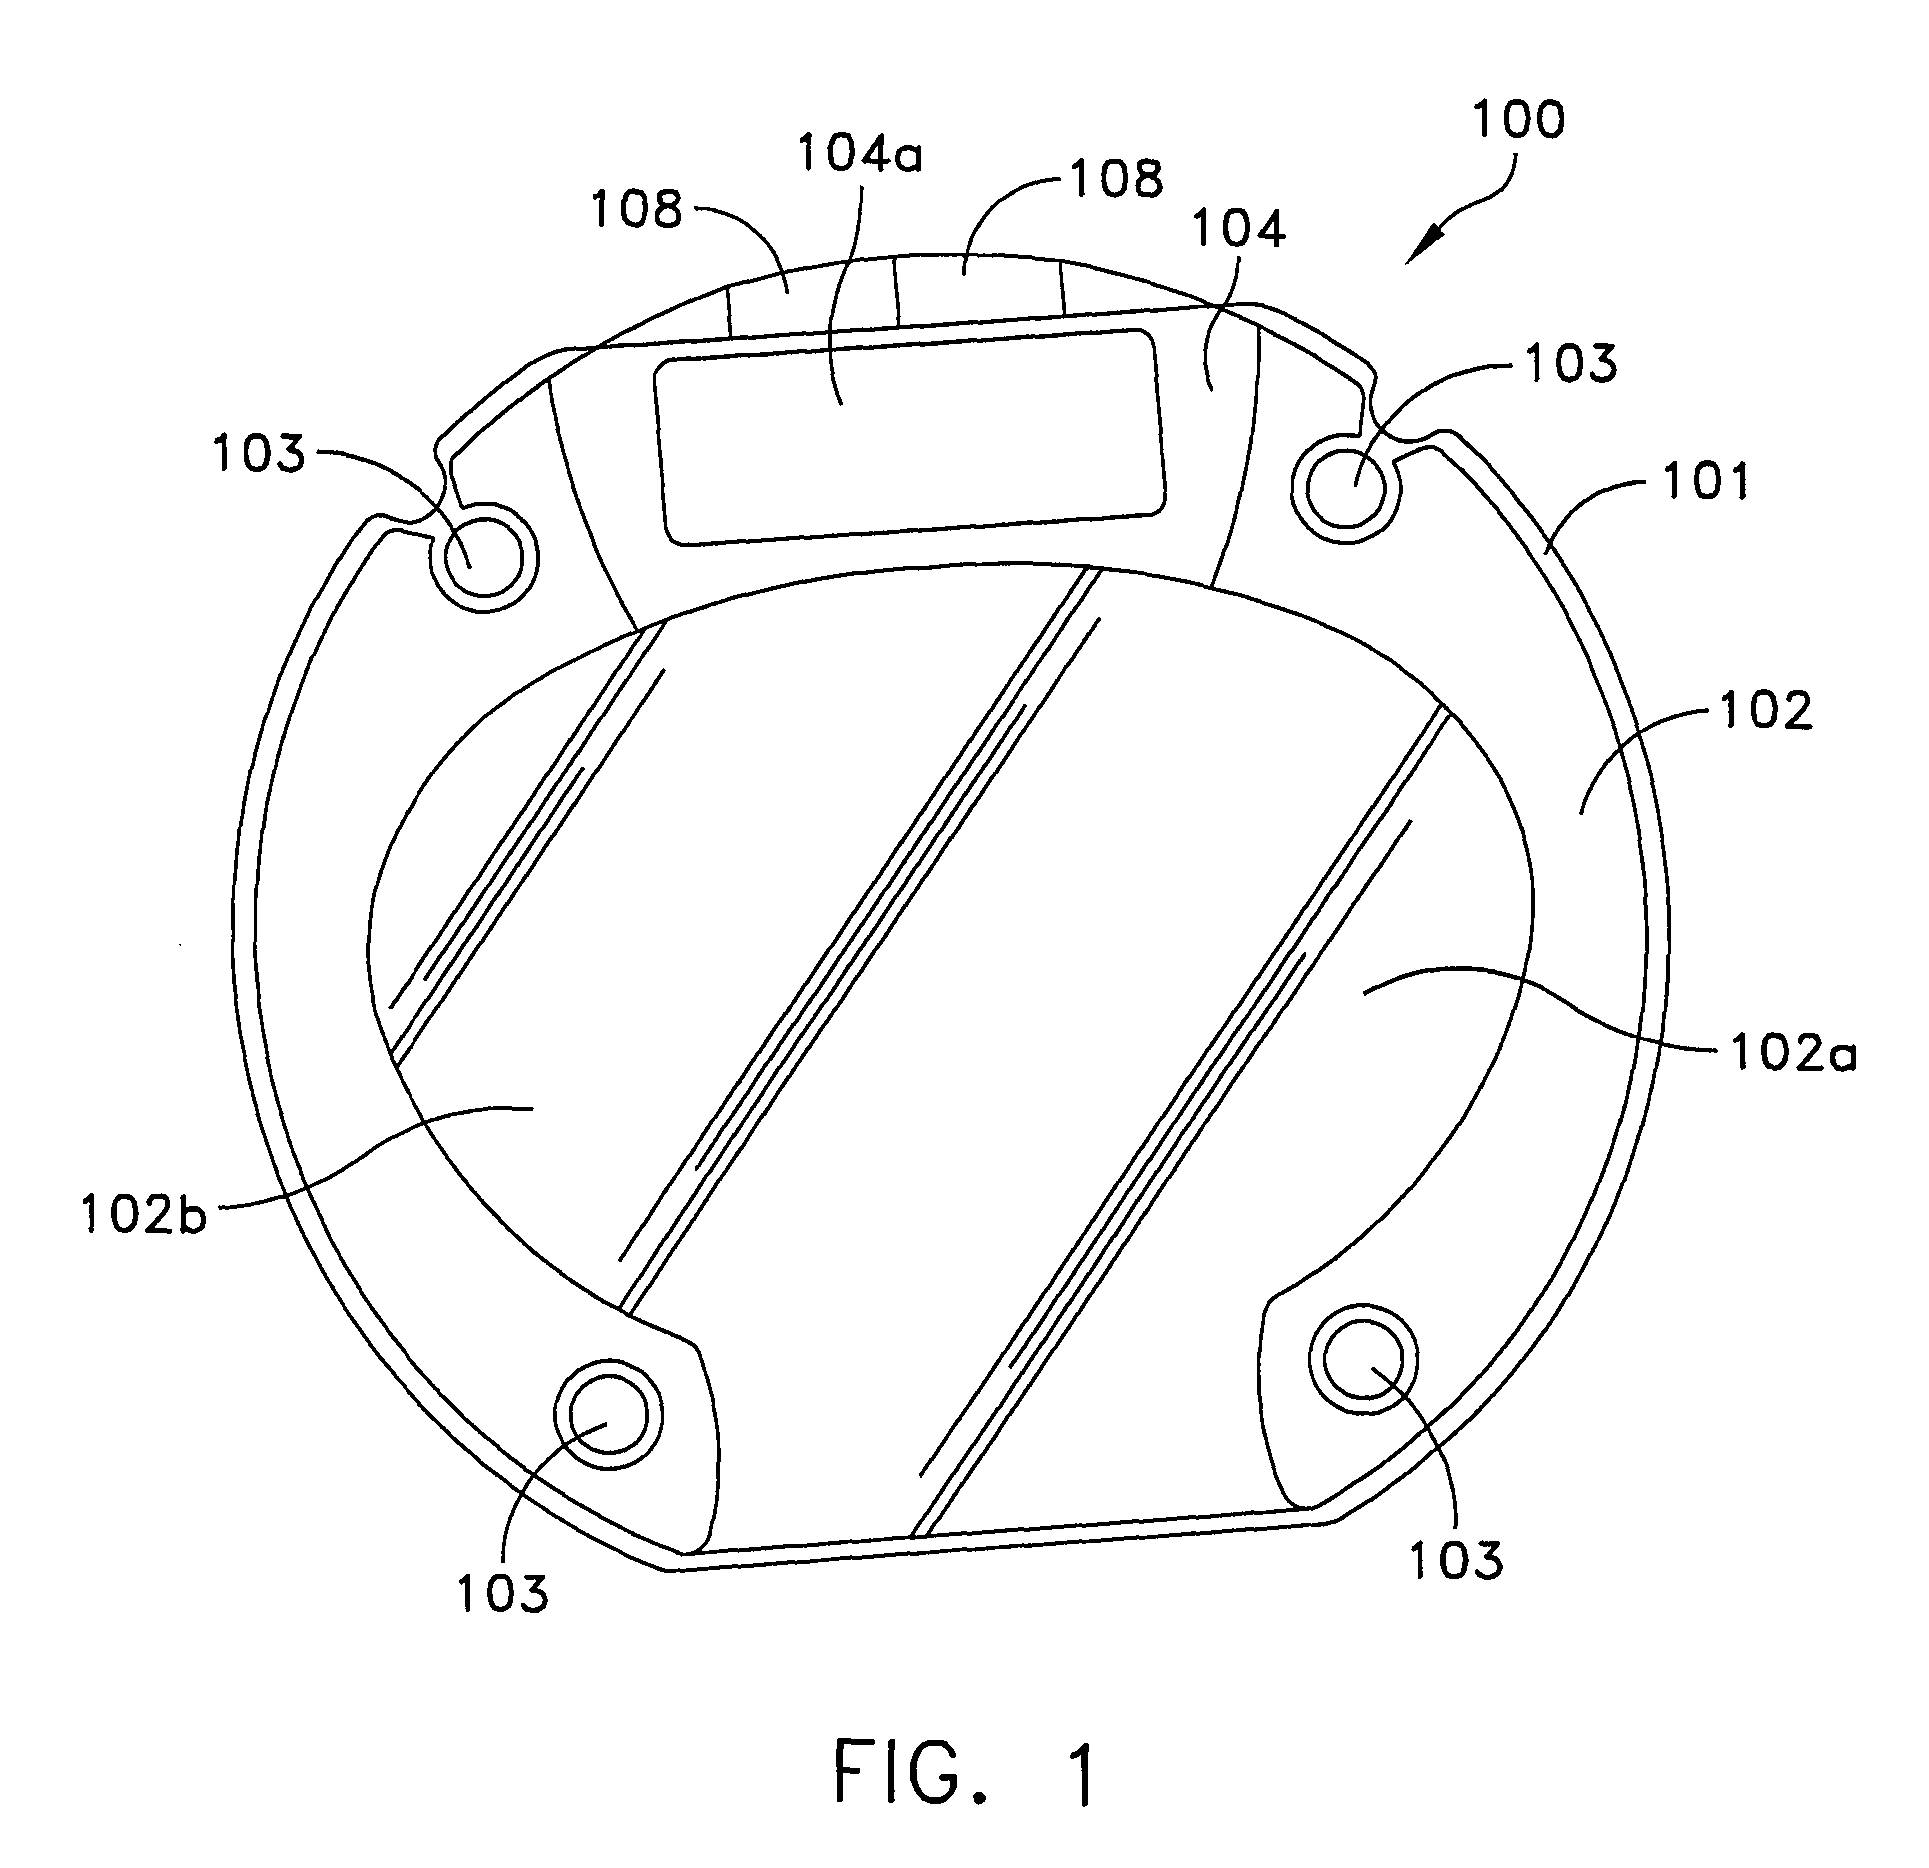 Device for detecting and displaying one or more of body weight, body fat percentage, blood pressure, pulse and environmental temperature